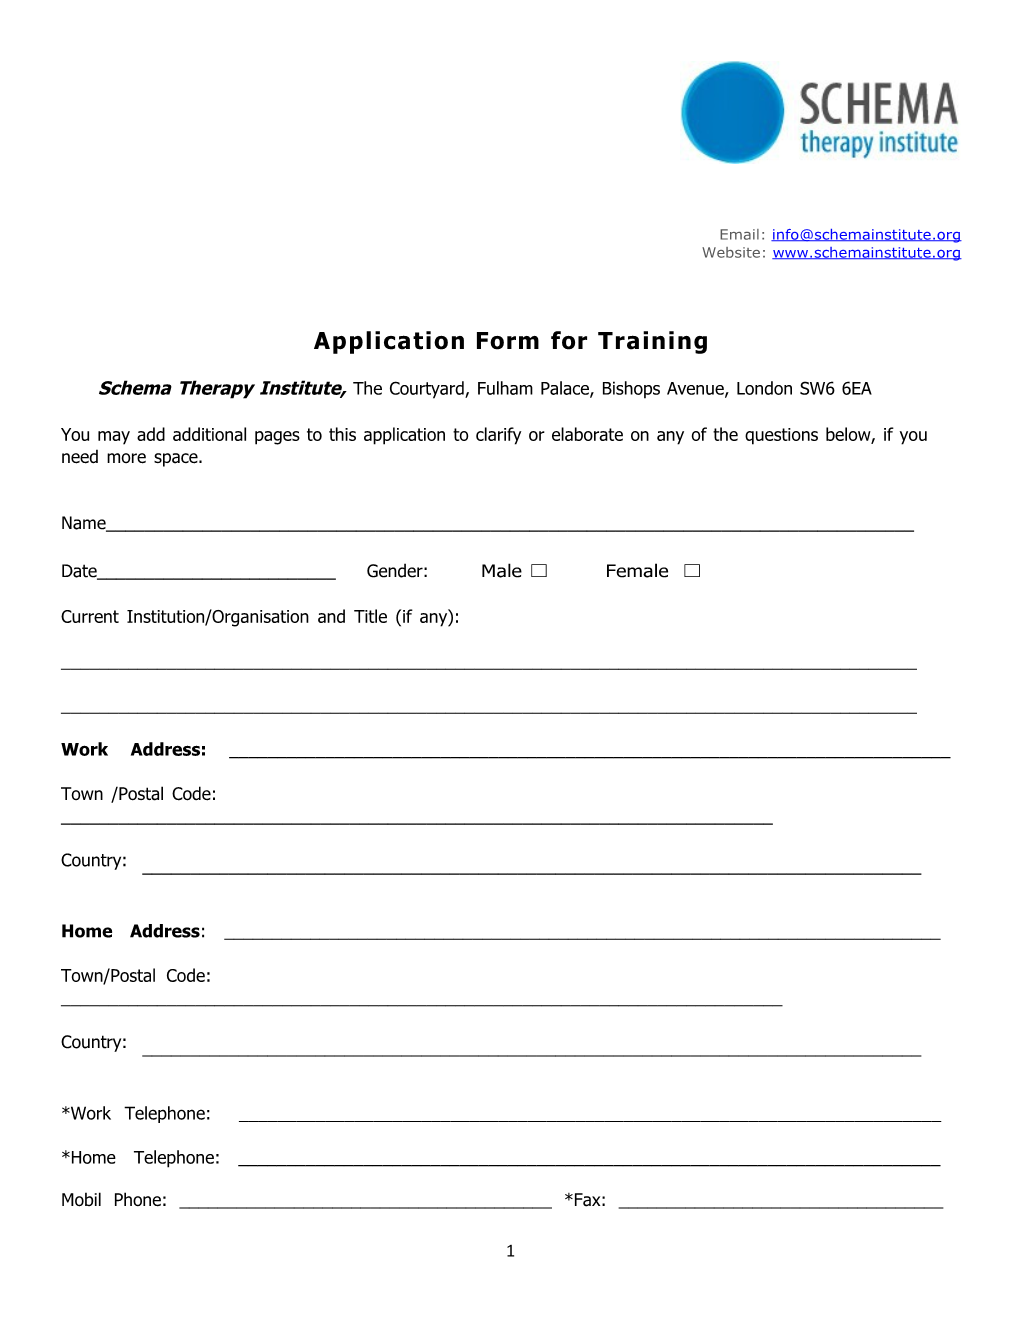 Application Form for STI Schema Therapy Training Programme 2010